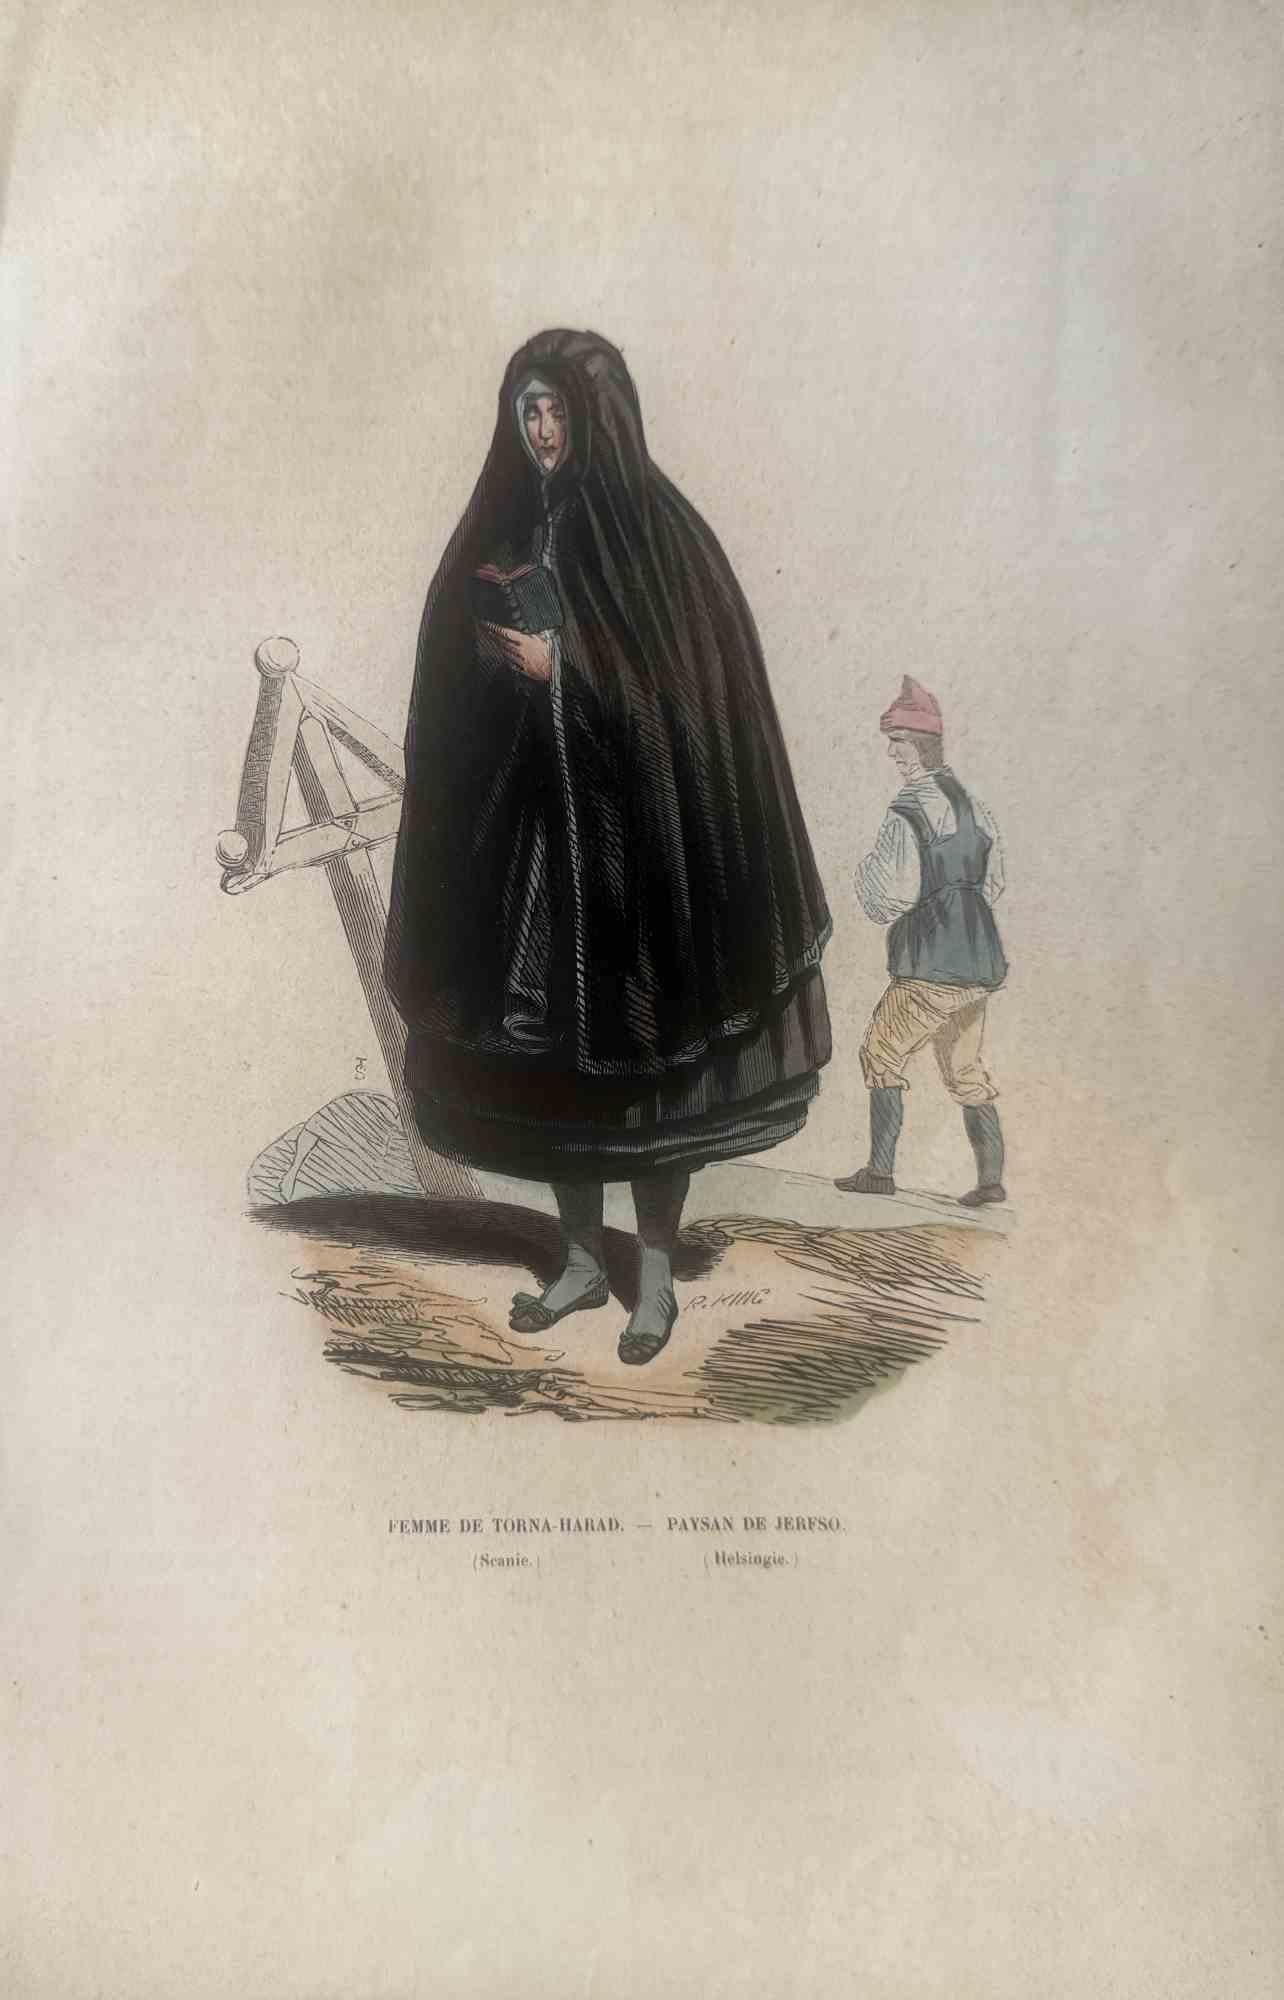 Various Artists Figurative Print - Uses and Customs - Lady of Torna-Harad - Lithograph - 1862